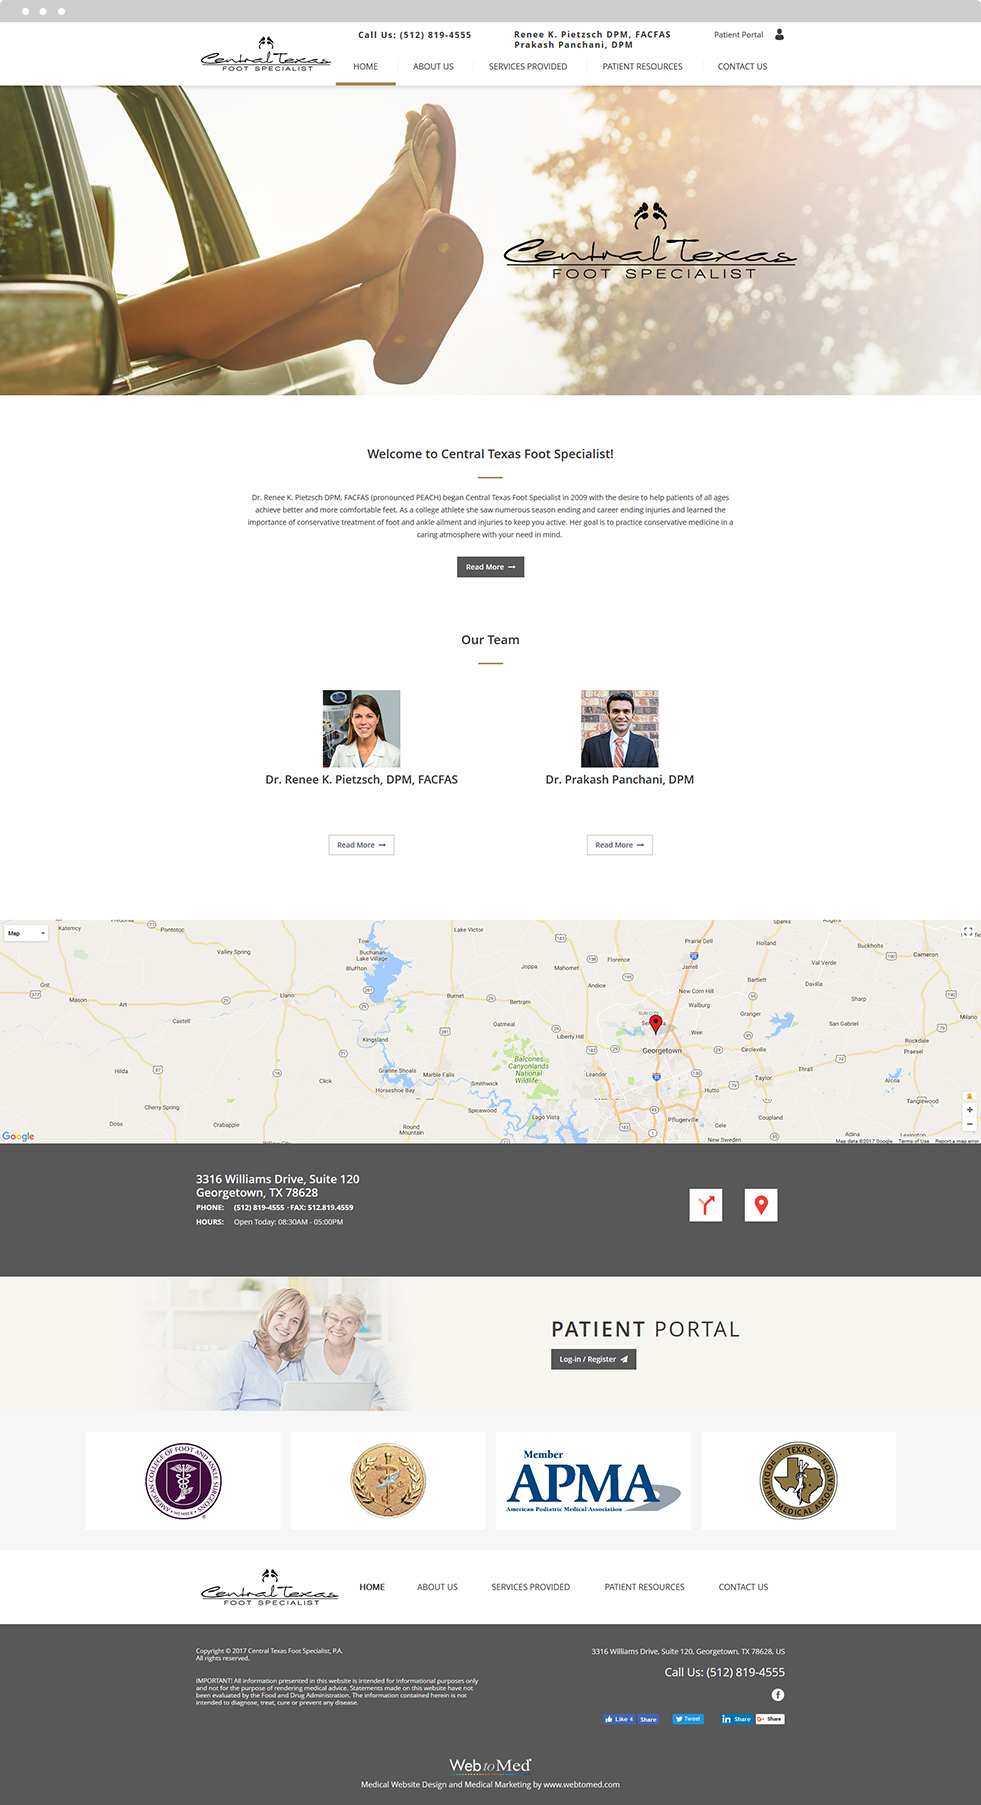 Podiatry Website Design - Central Texas Foot Specialist - Homepage